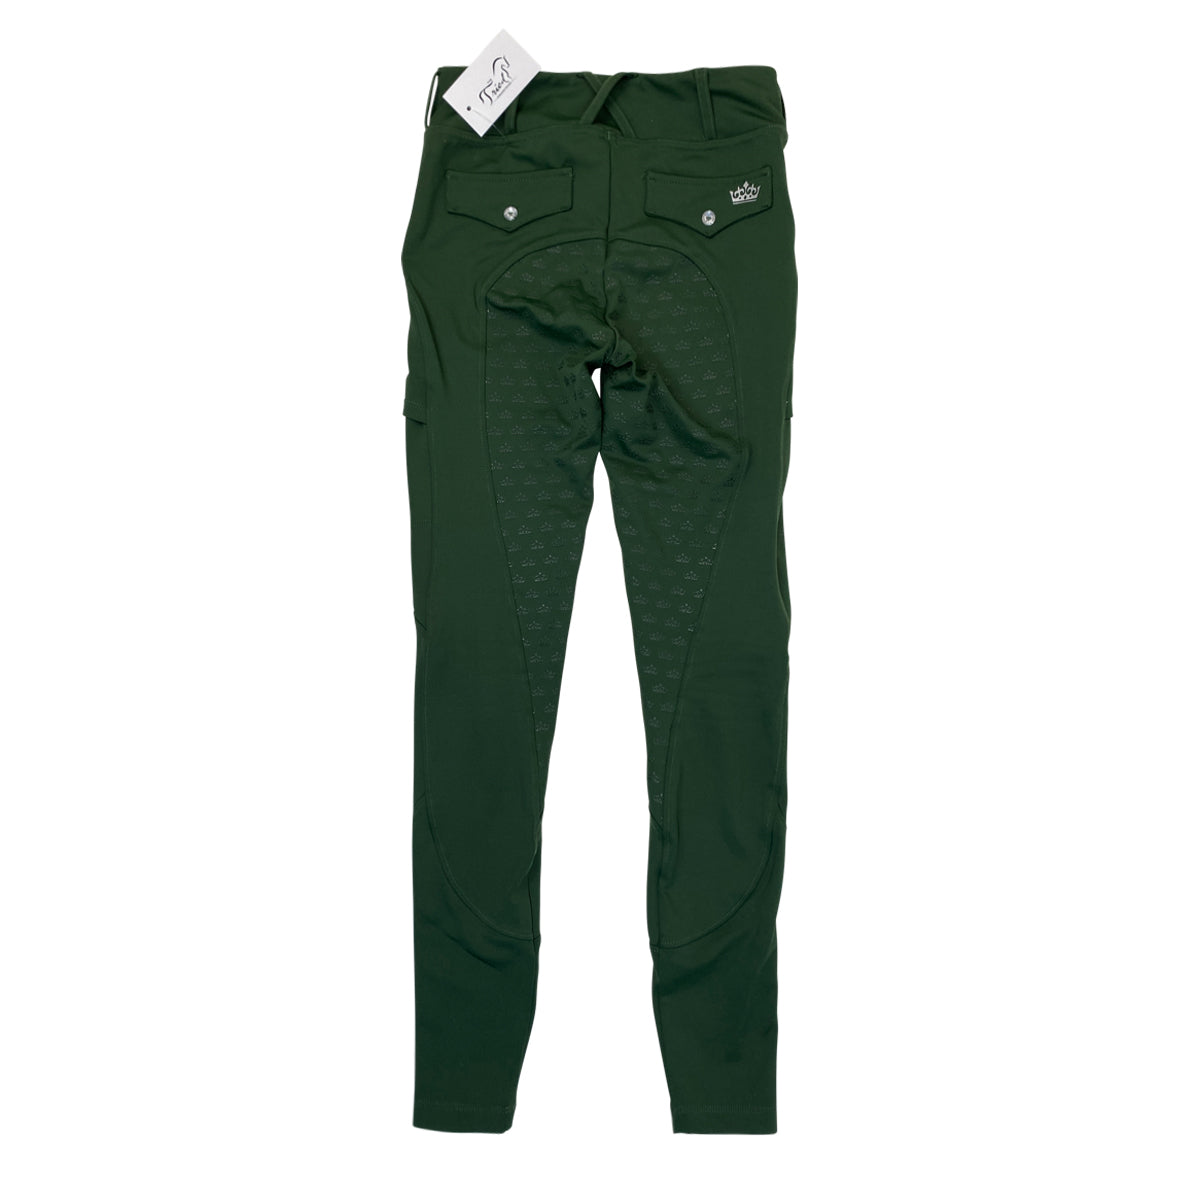 Esprit Equestrian 'Classic' Full Seat Riding Tights in Green